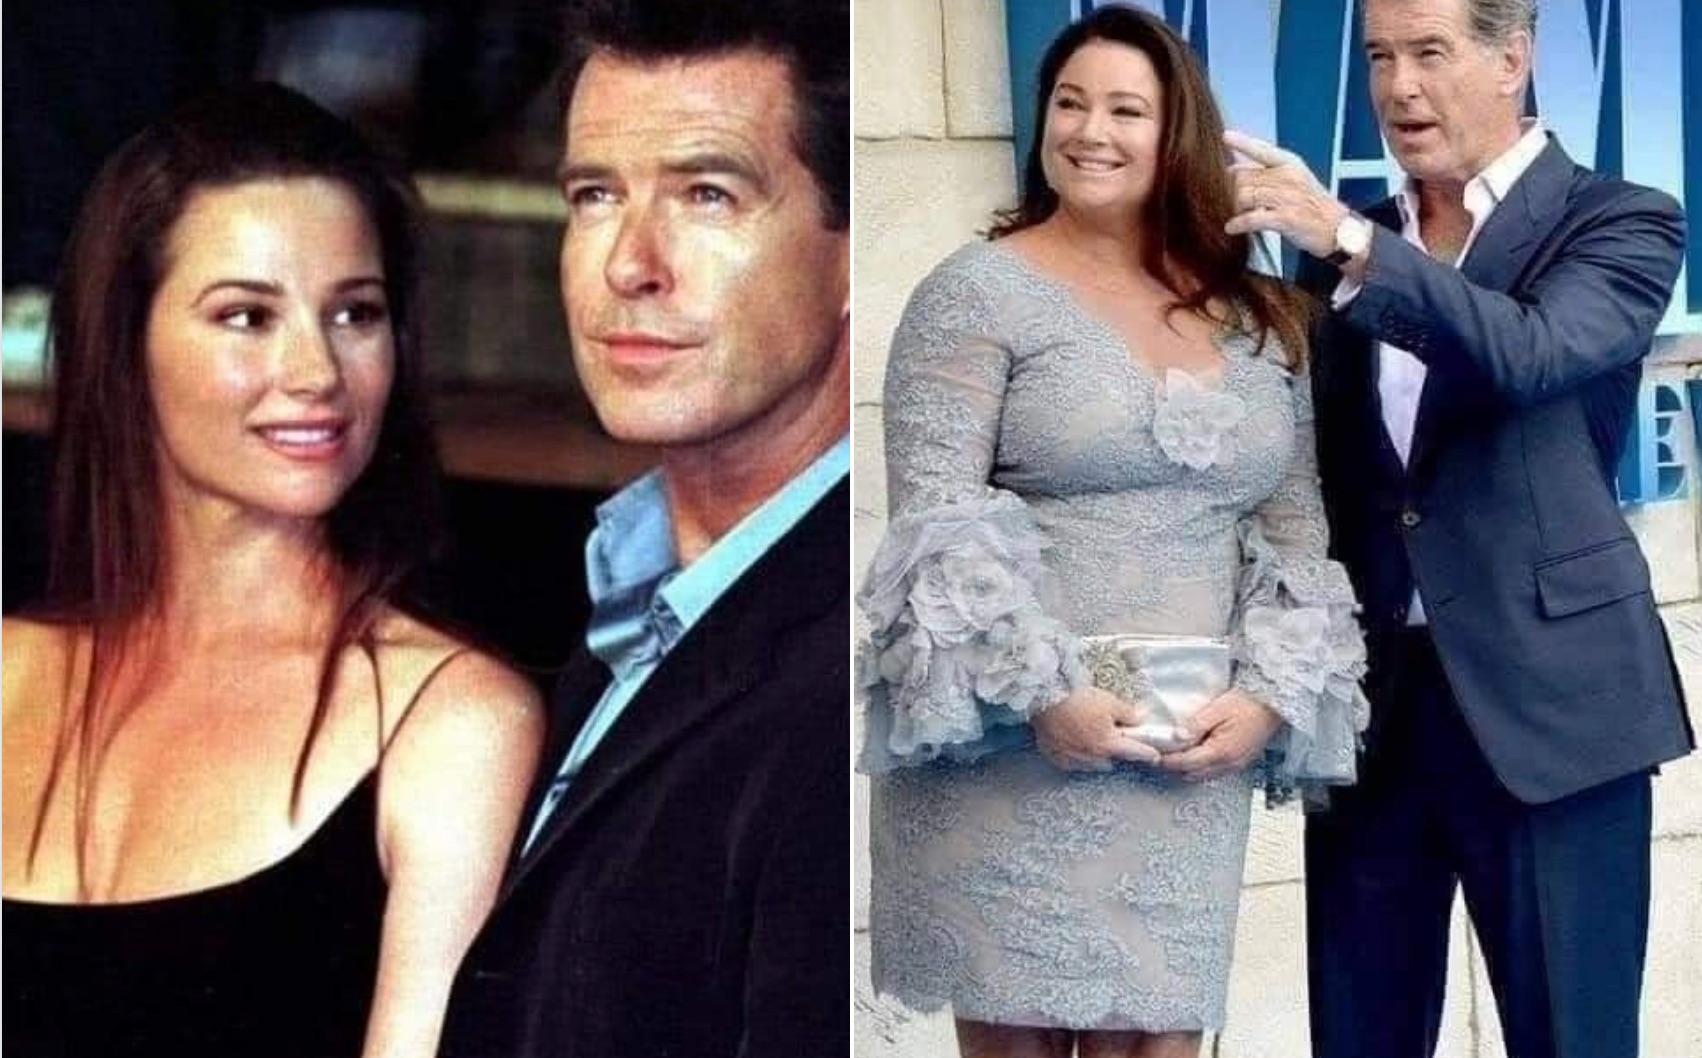 Pierce Brosnan: ‘She Is in My Eyes the Most Beautiful Woman in the World …’